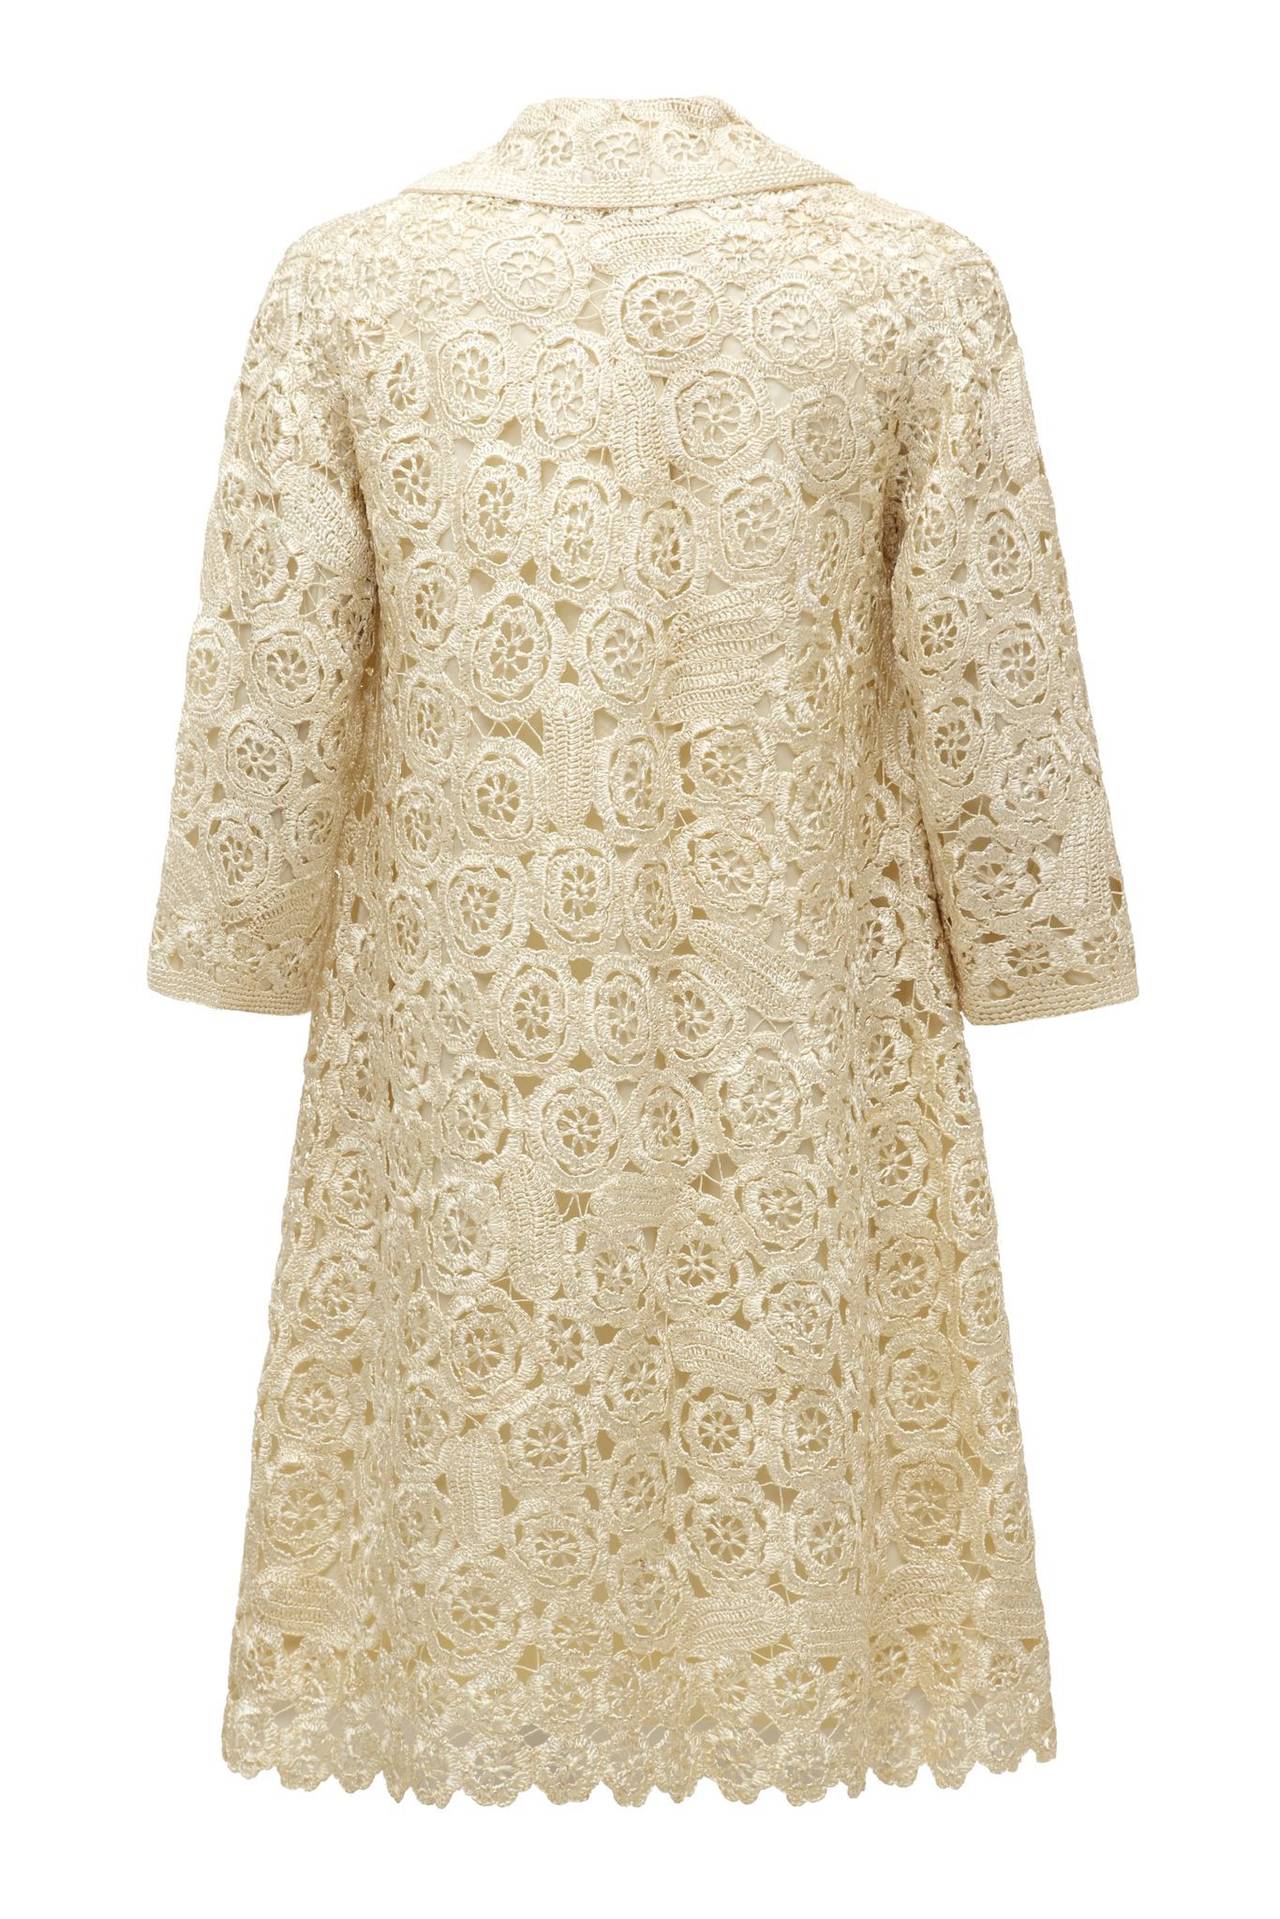 Exquisite 1960s Anna Giovannozzi A-line ivory raffia coat with beautifully hand woven/ crocheted exterior. It is fully lined in a coordinating lining and features ¾ sleeves and matching raffia buttons to fasten at the front. A very rare piece in